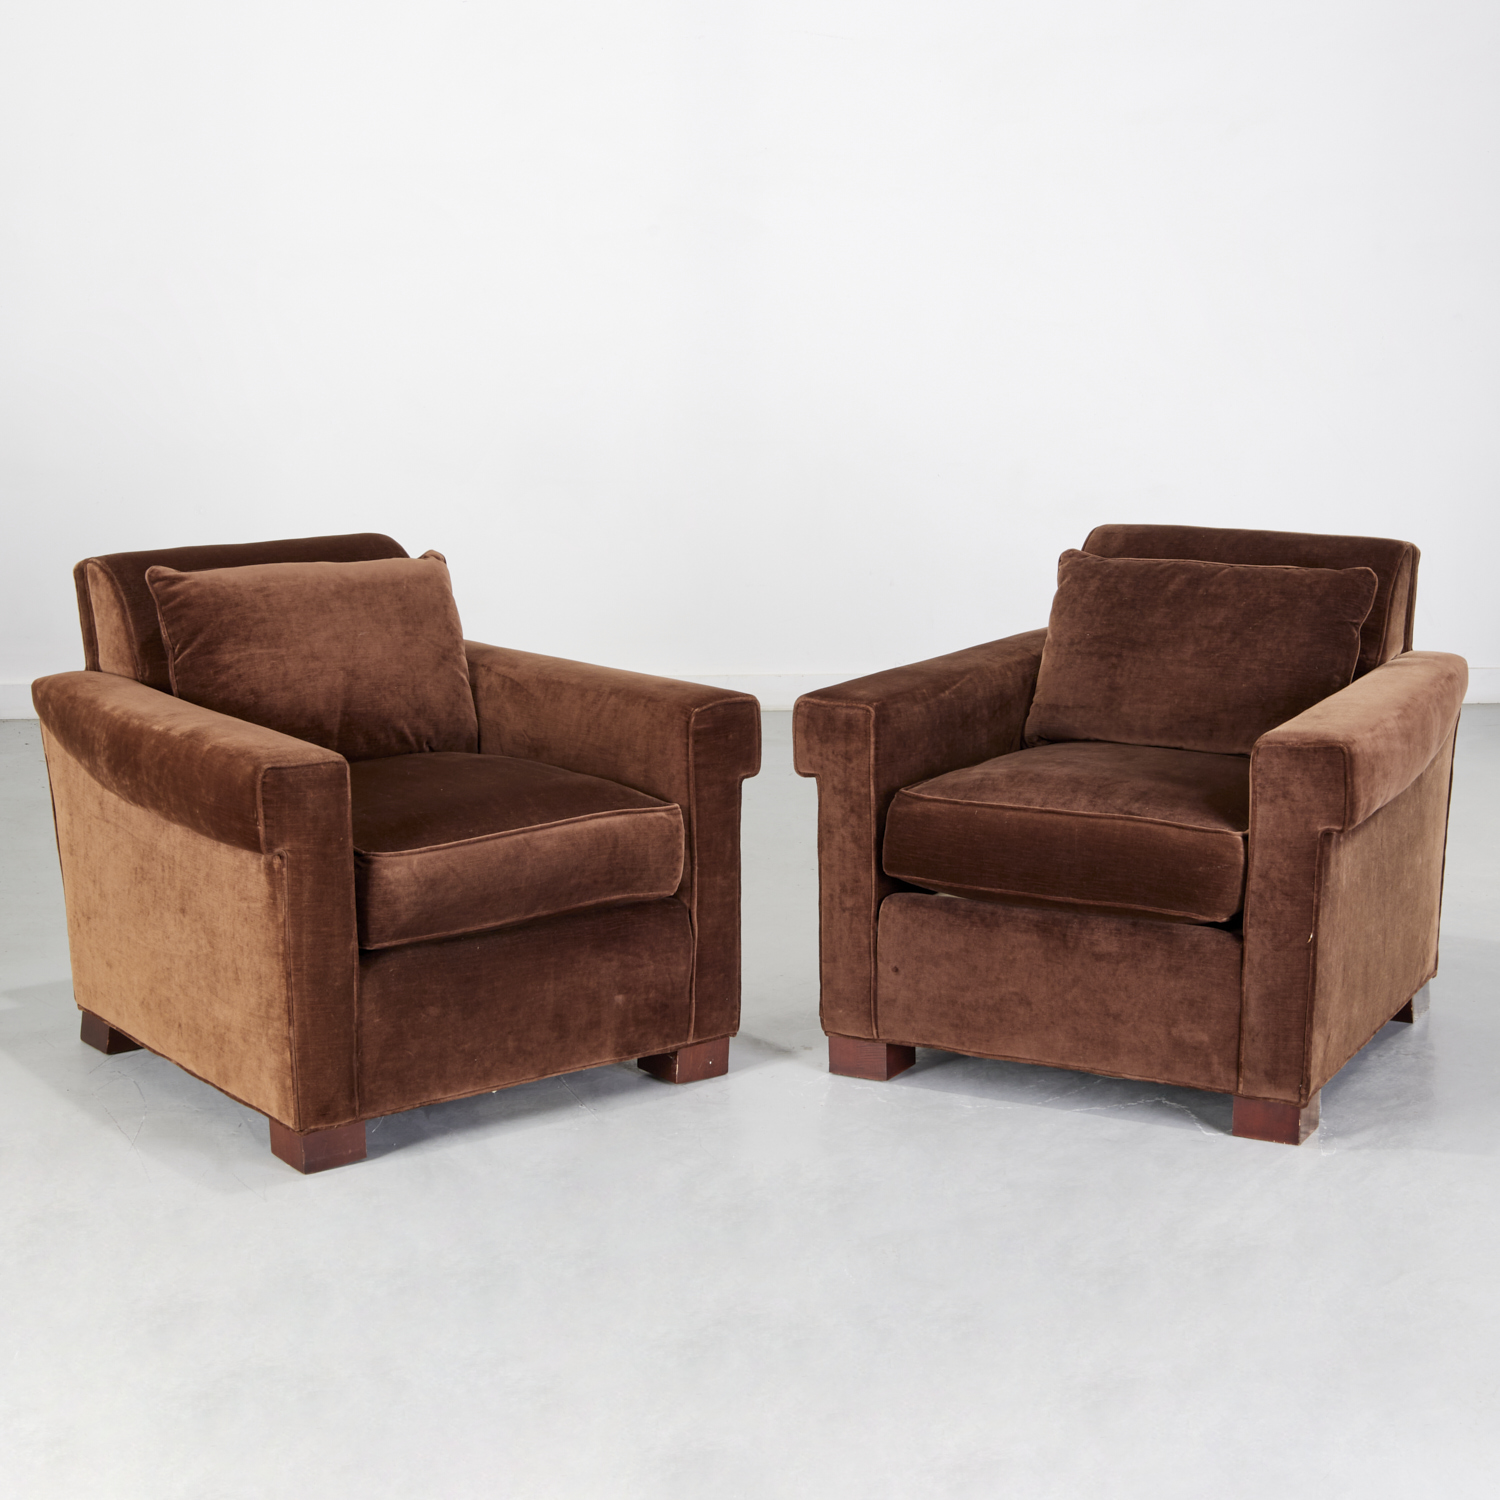 PAIR HICKORY CHAIR CO. ART DECO